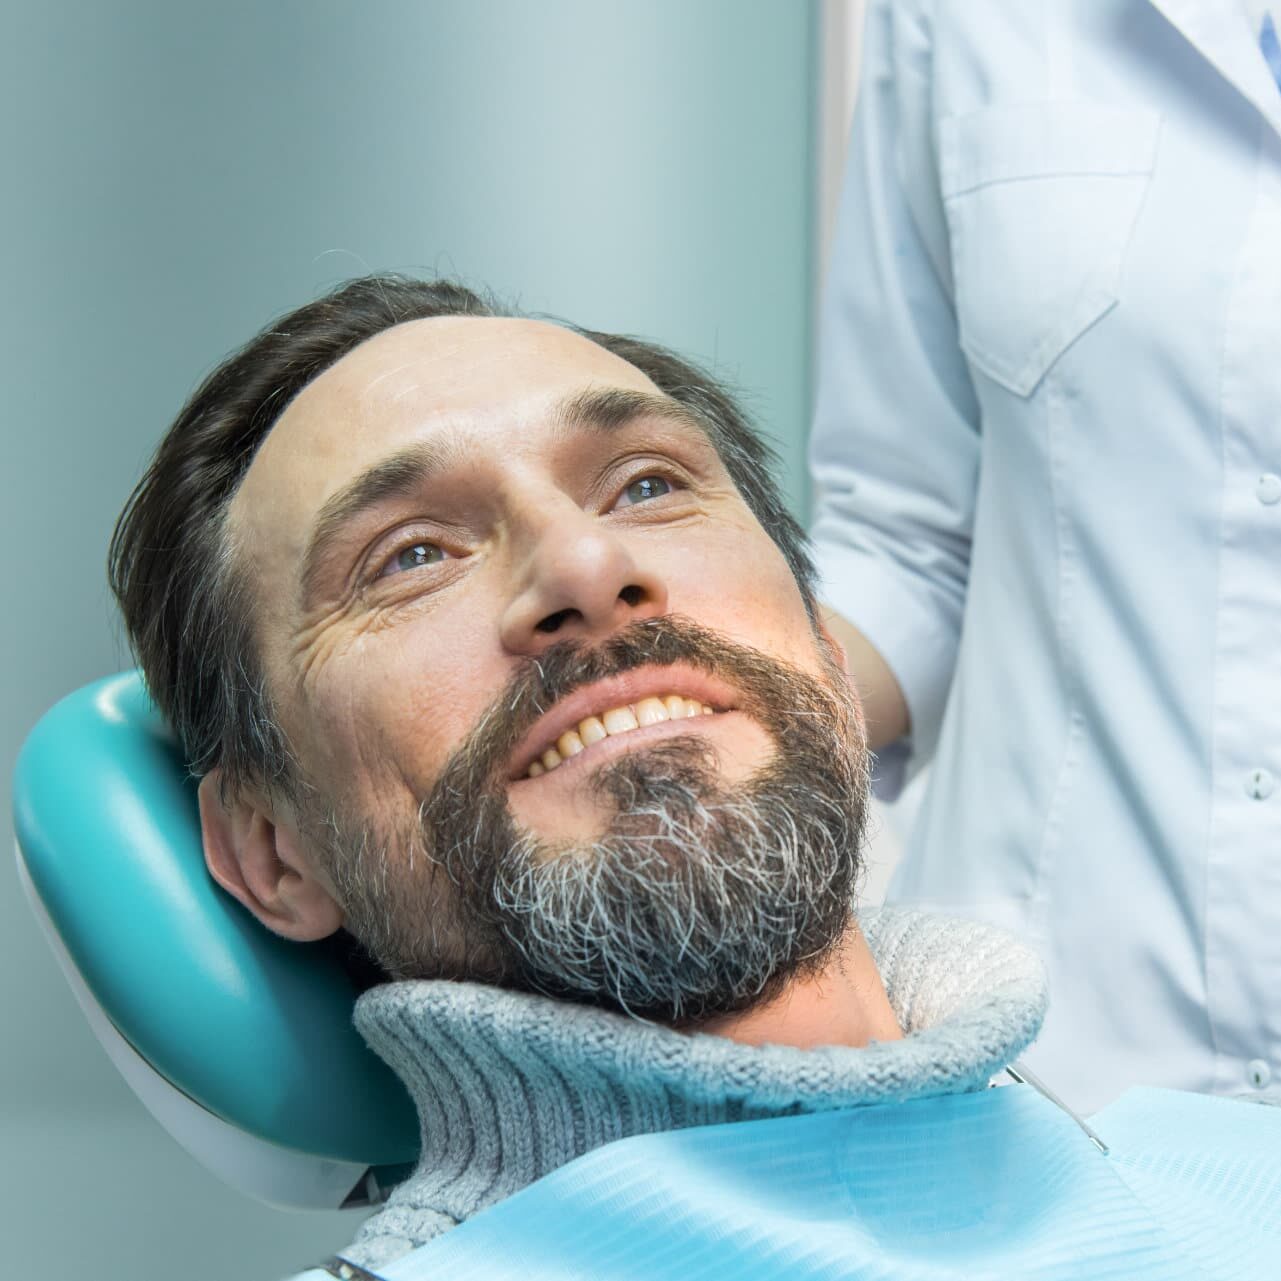 Feel at ease with our sedation options, making dental visits a more relaxed experience.